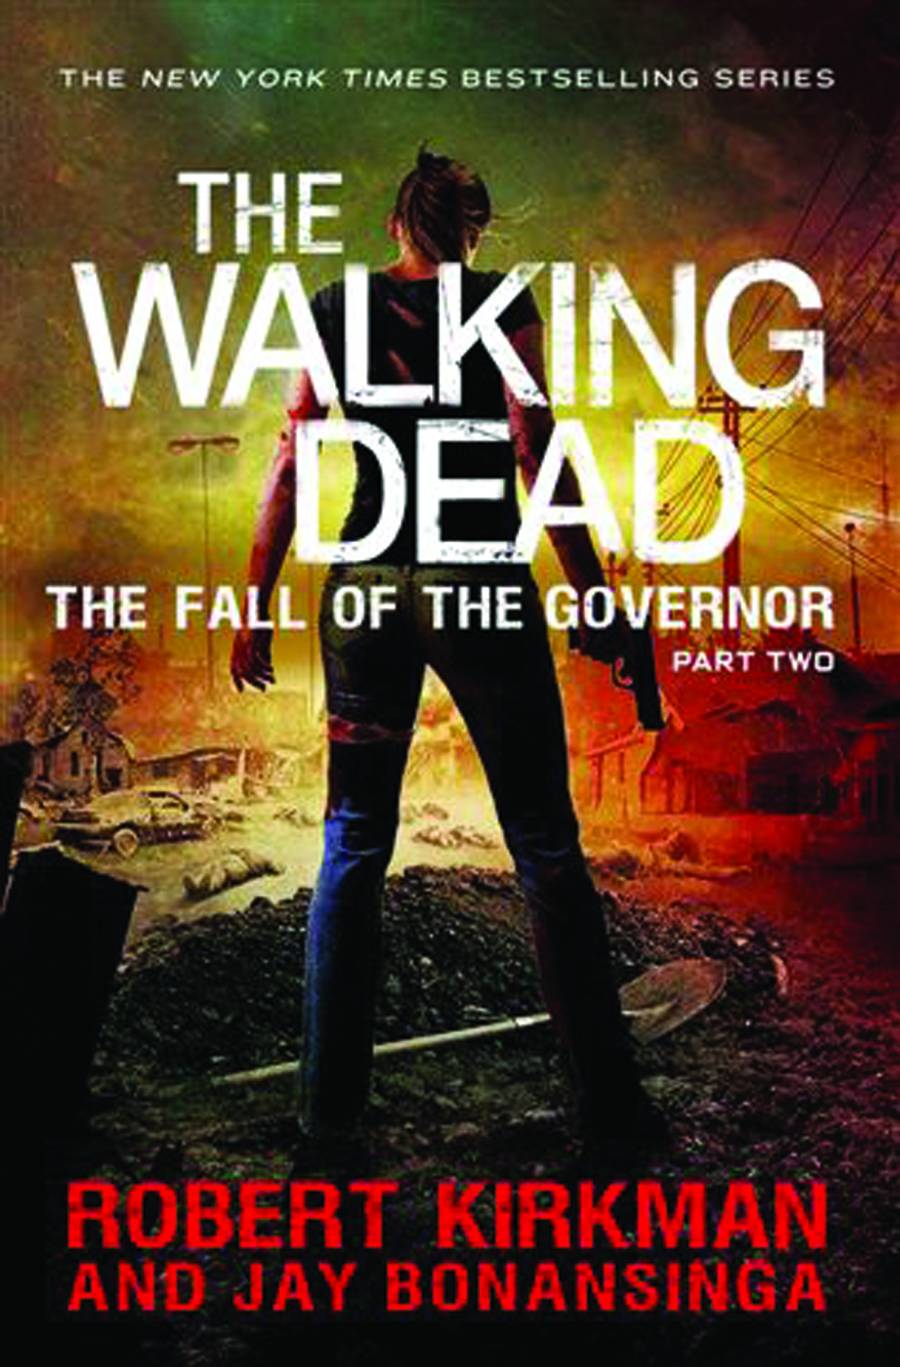 Walking Dead Novel Hardcover Volume 4 Fall of the Governor